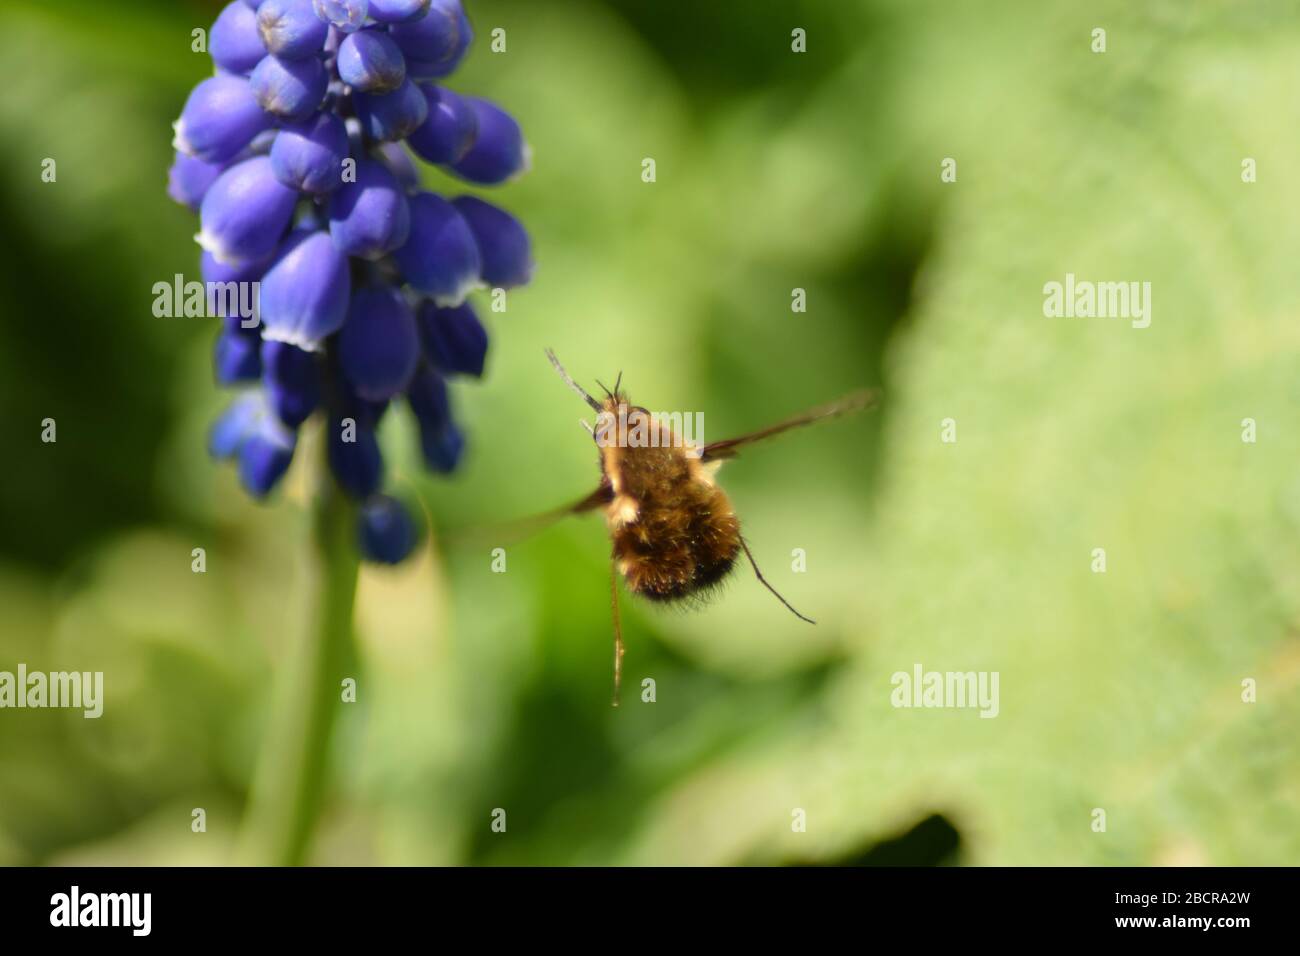 large dark edged bee-fly, northern hemisphere bumble bee variety known for early spring pollination Stock Photo